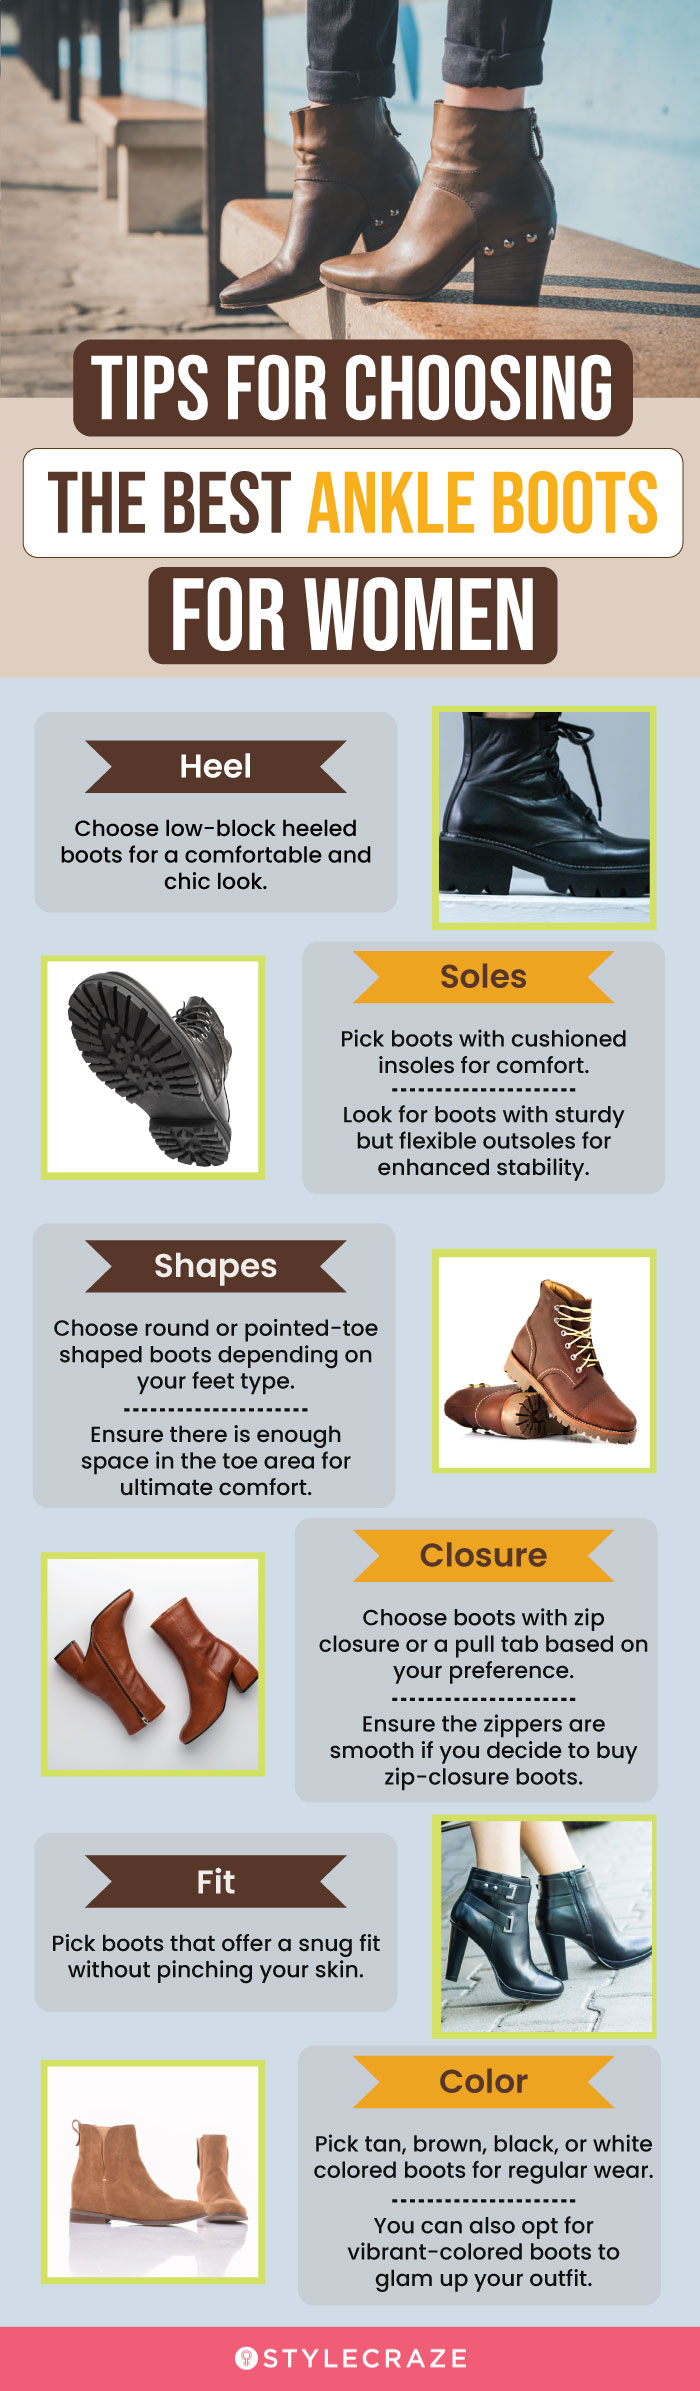 Tips For Choosing The Best Ankle Boots For Women (infographic)